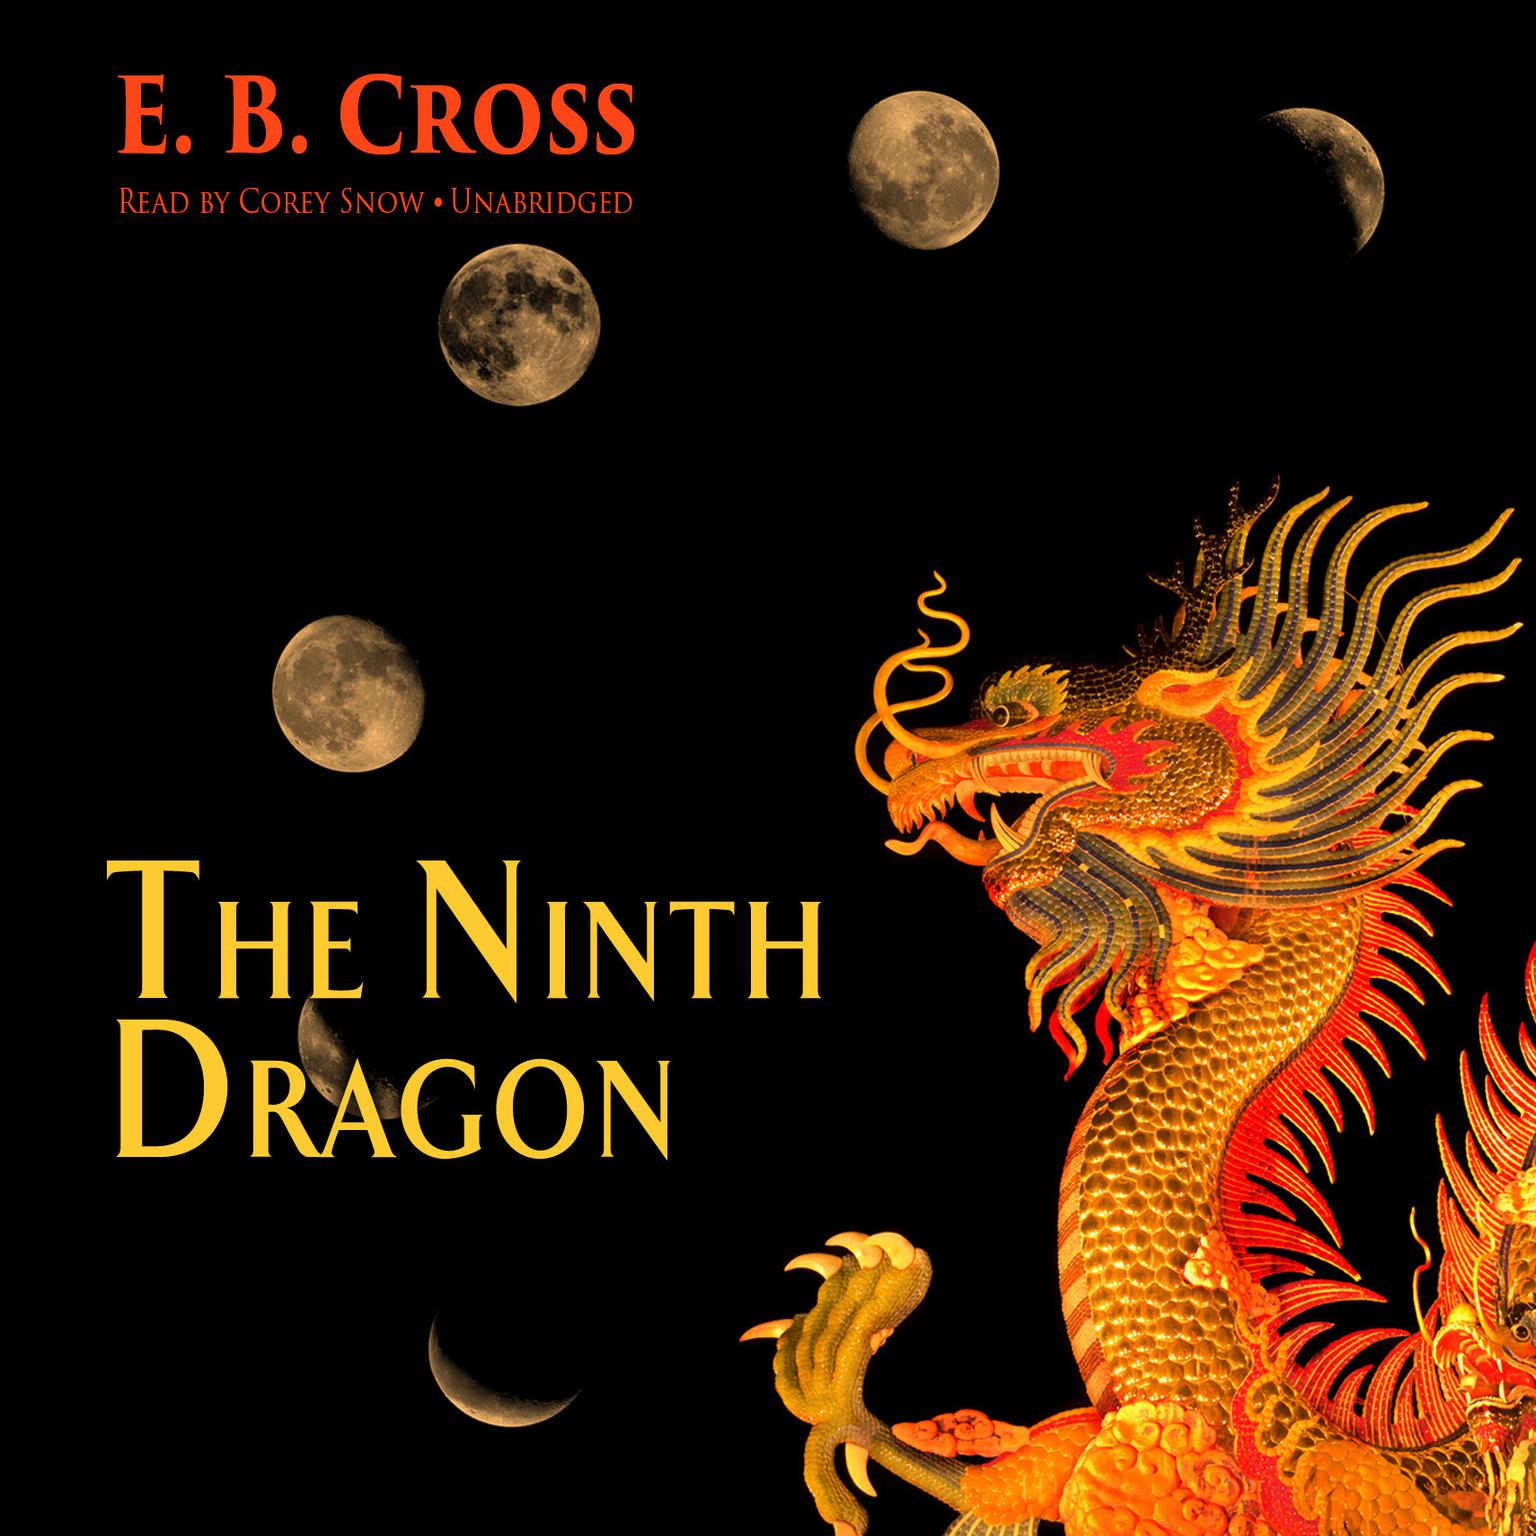 The Ninth Dragon Audiobook, by Ed Breslin